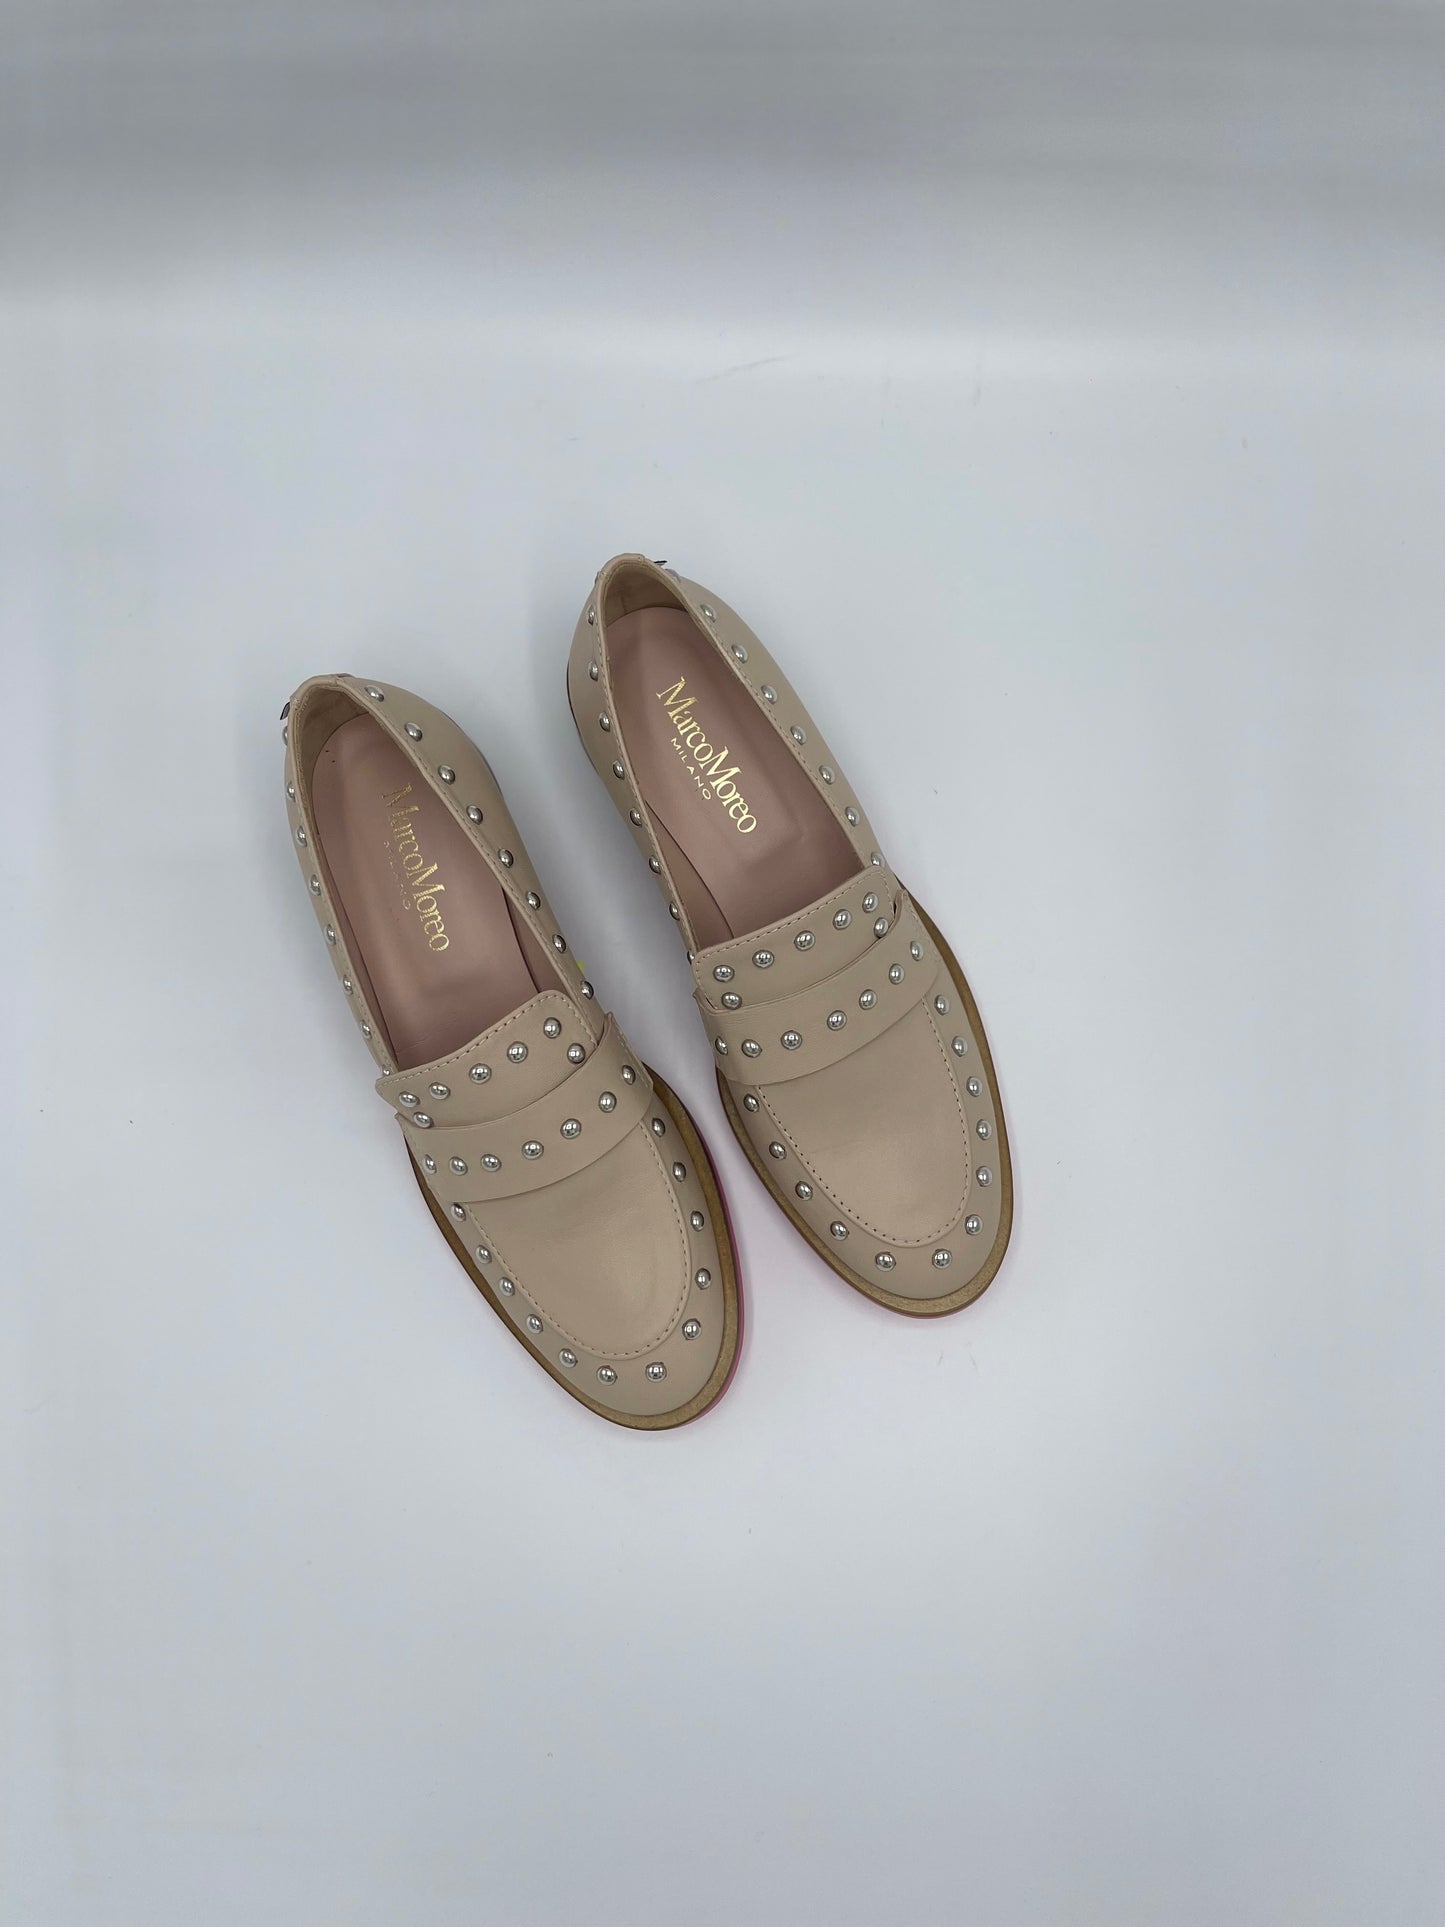 NAPPA BEIGE STUDDED LOAFER - MARCO MOREO